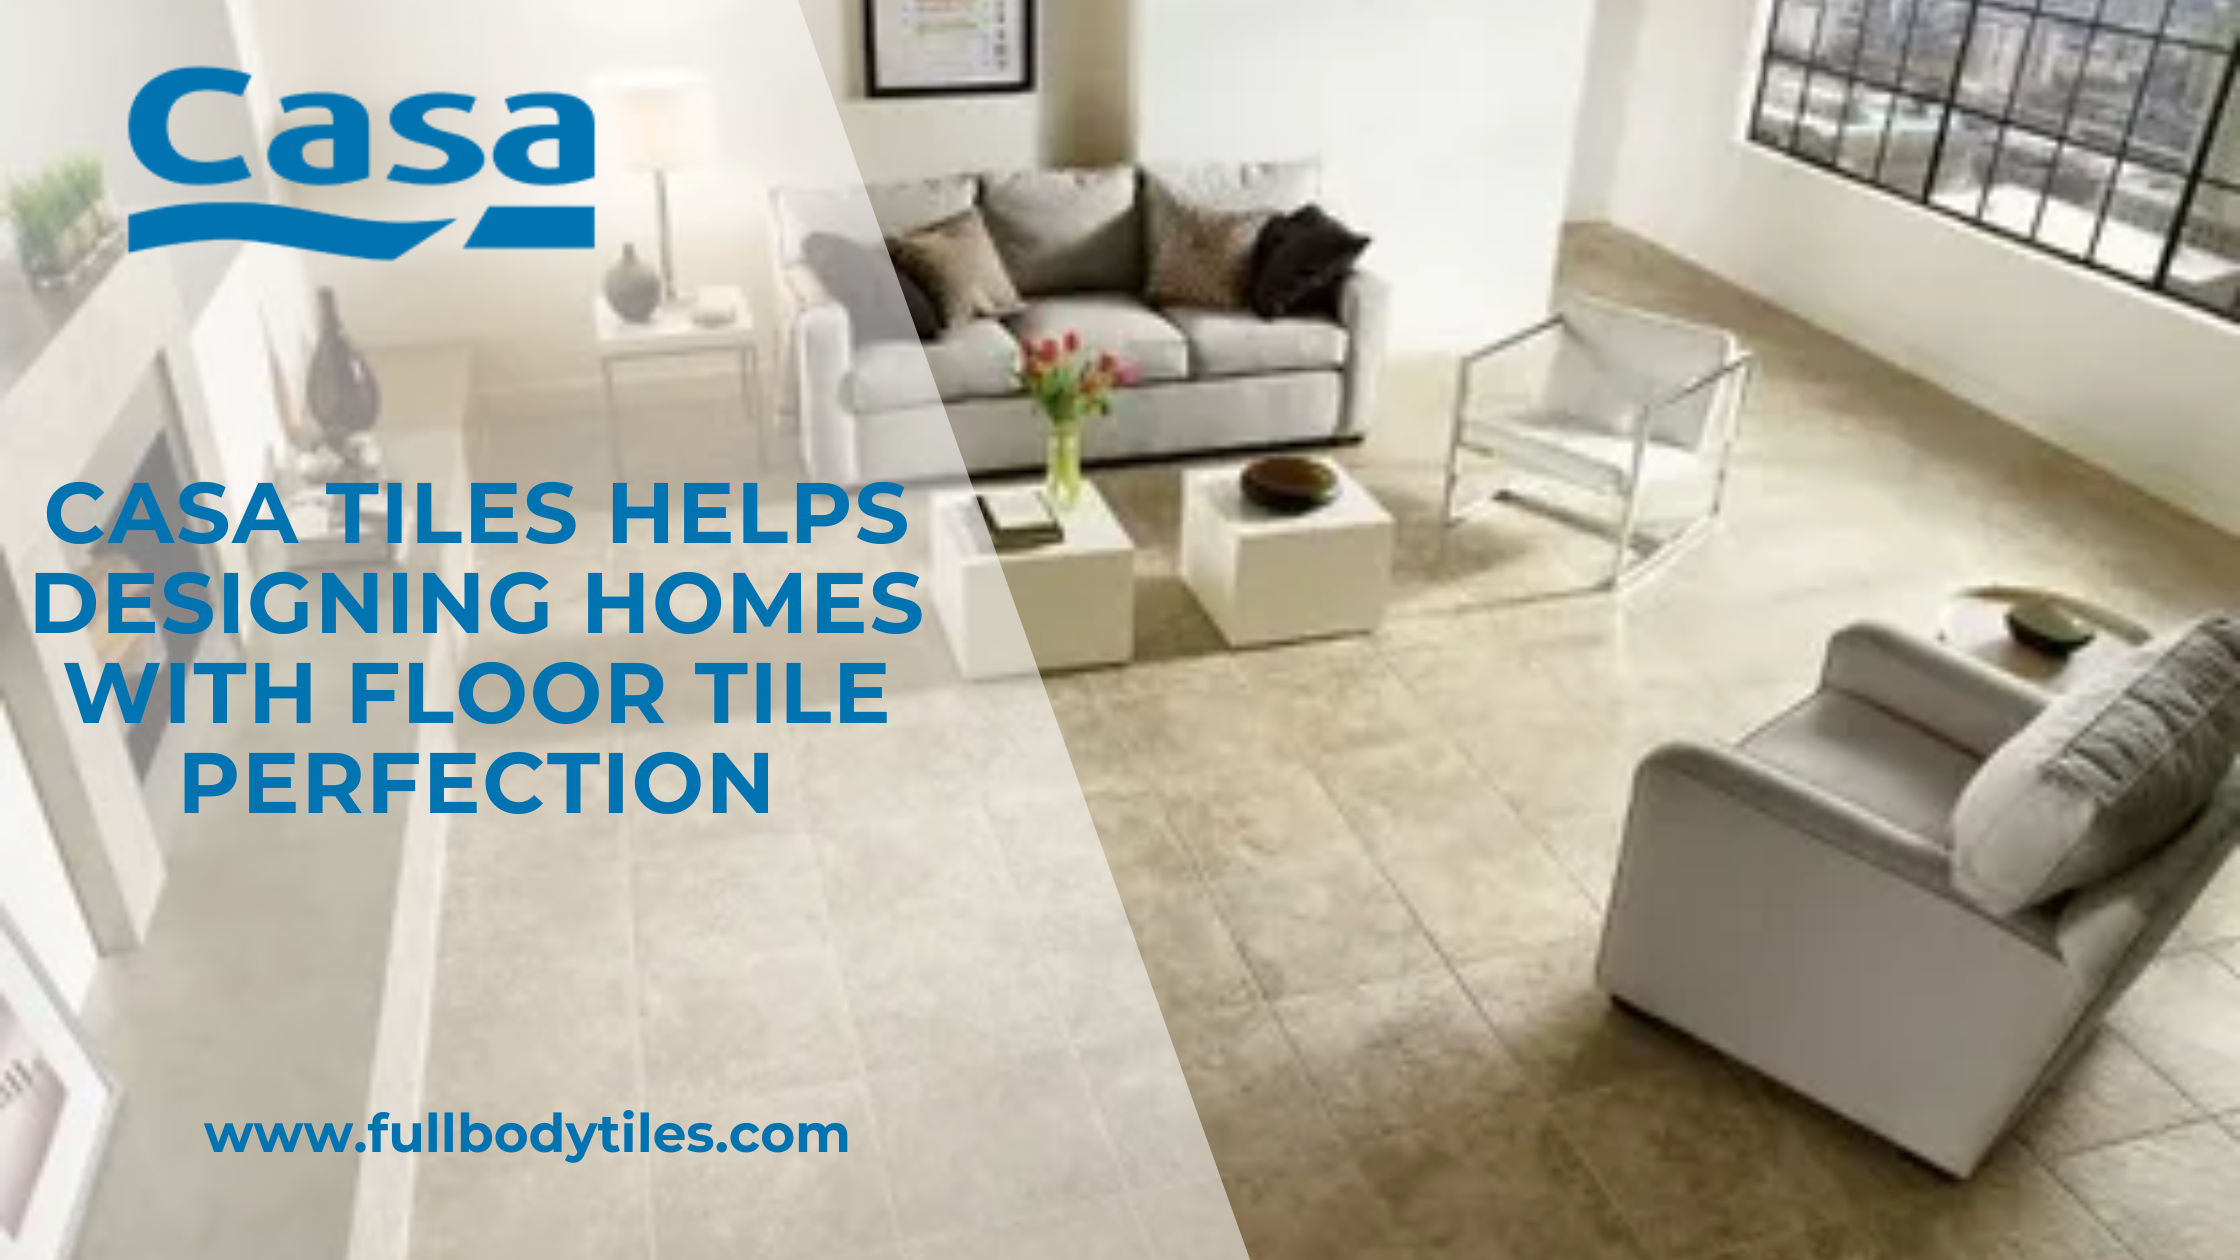 Casa Tiles Helps Designing Homes with Floor Tile Perfection